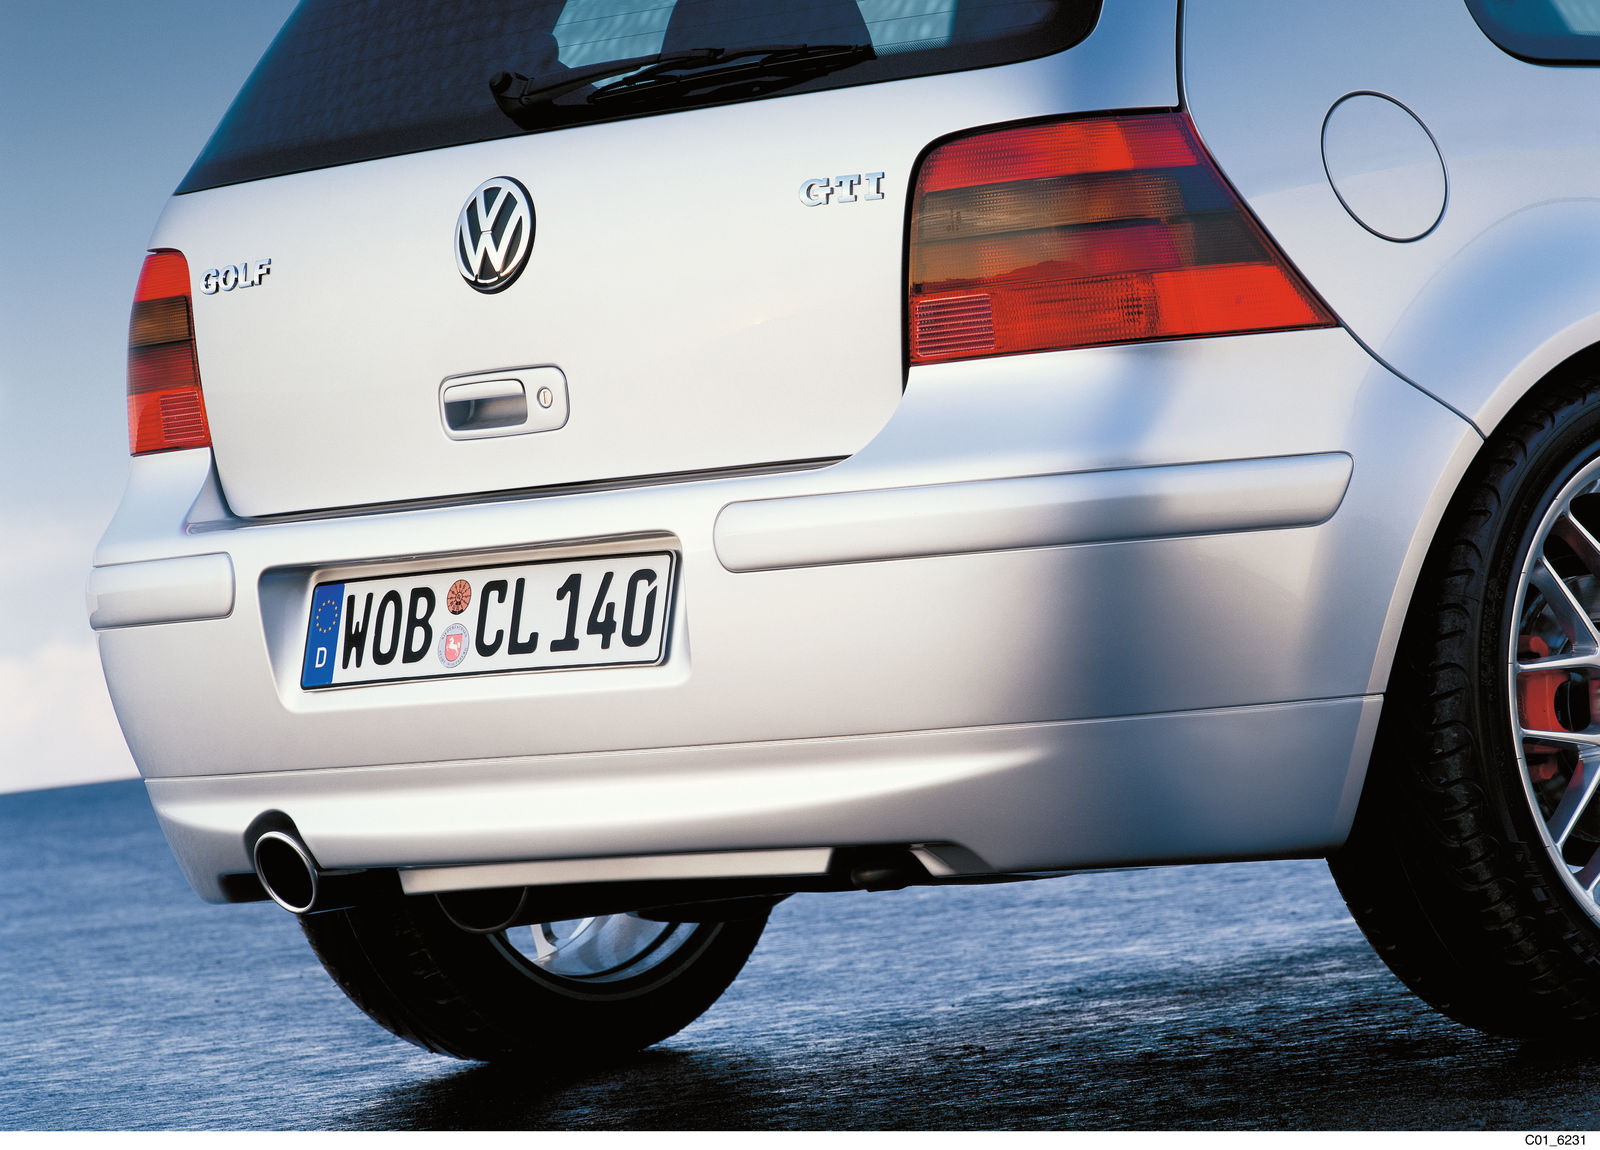 Product: Golf GTI 132 kW (180 PS)